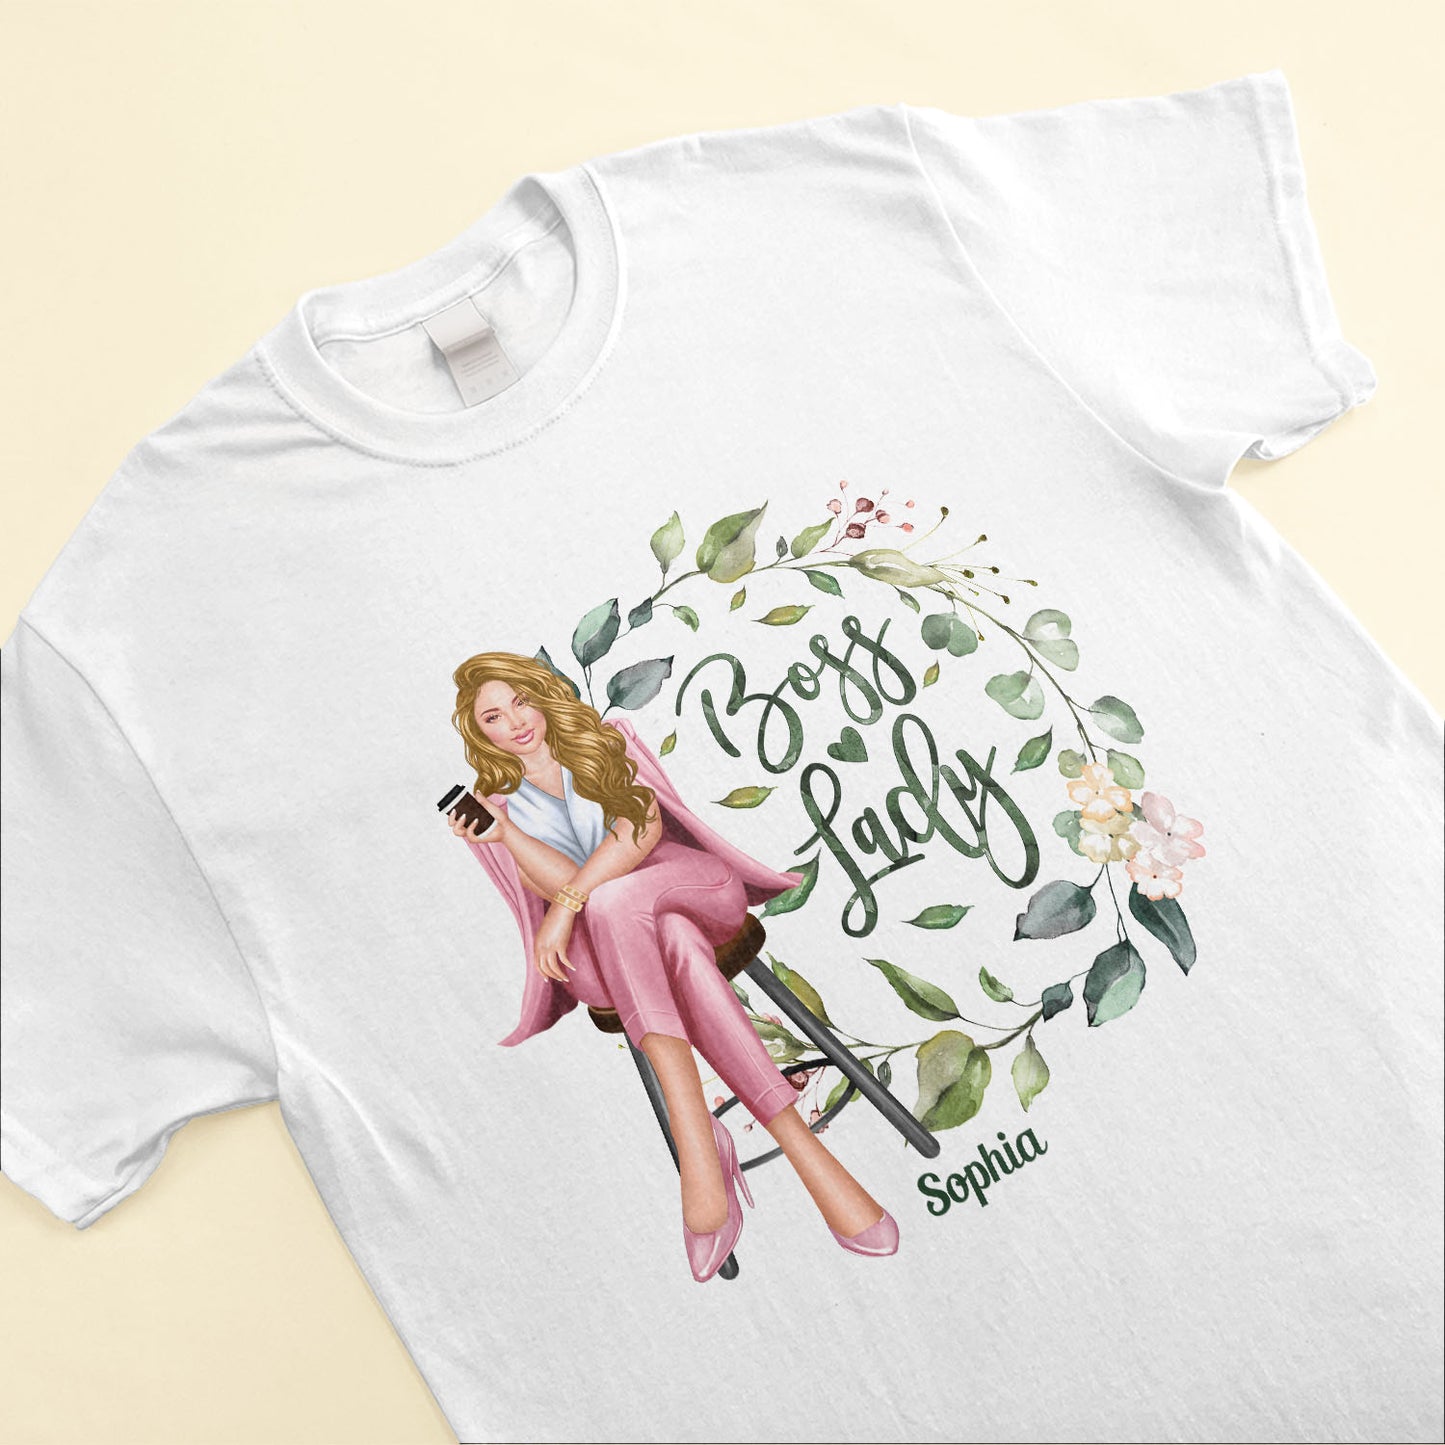 Boss Lady - Personalized Shirt - Birthday Gift Motivational Gift For Woman, Wife, Boss